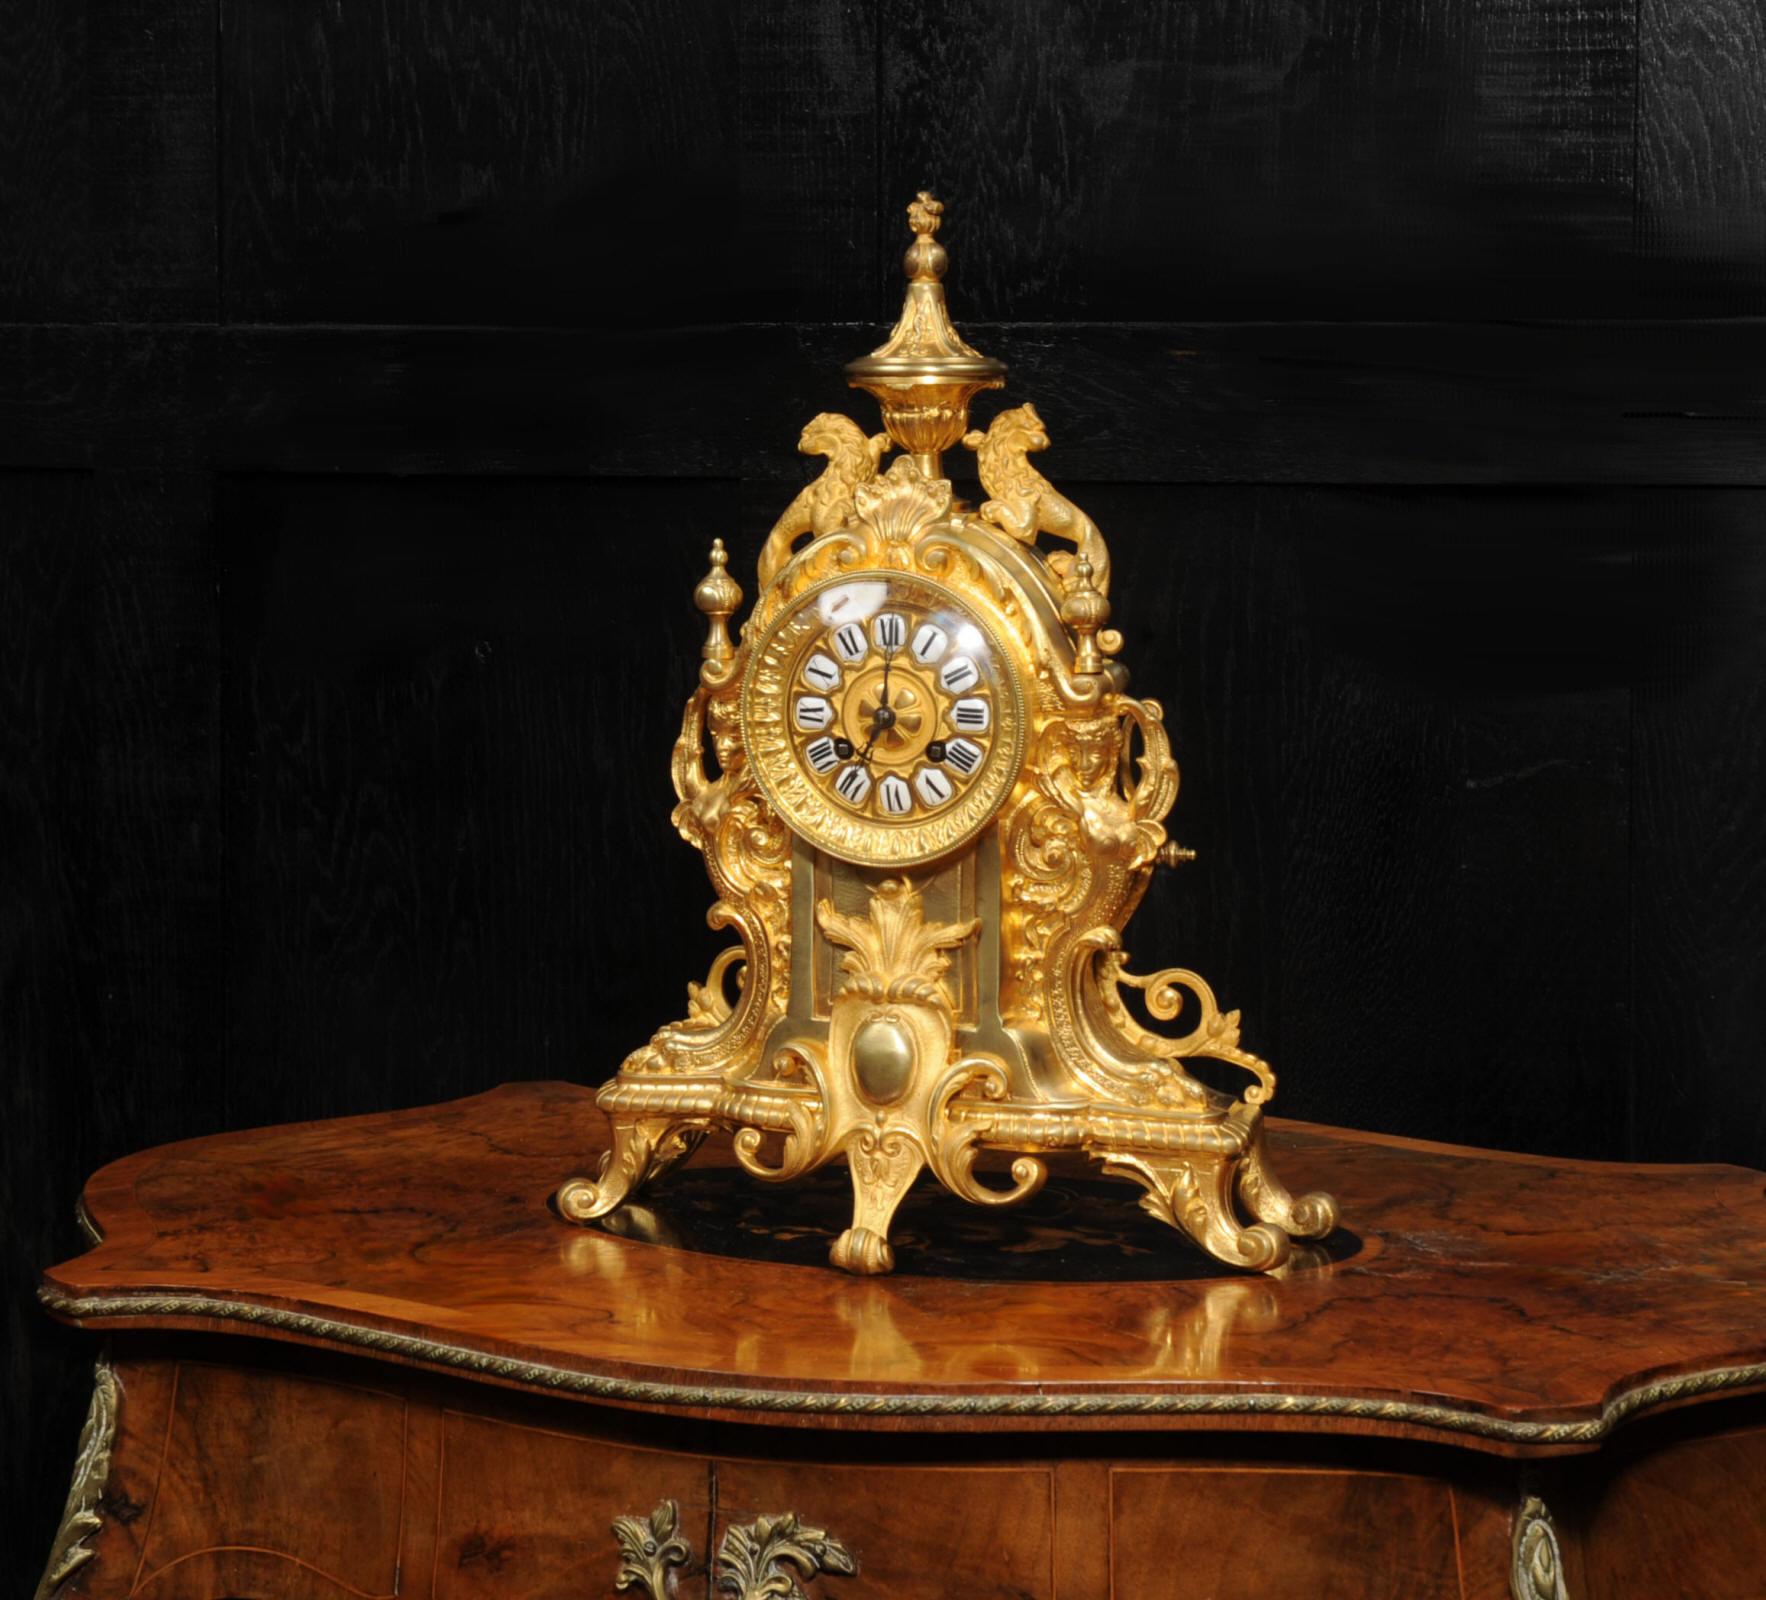 Louis XVI Antique French Ormolu Clock - Lions Rampant - overhauled and tested For Sale